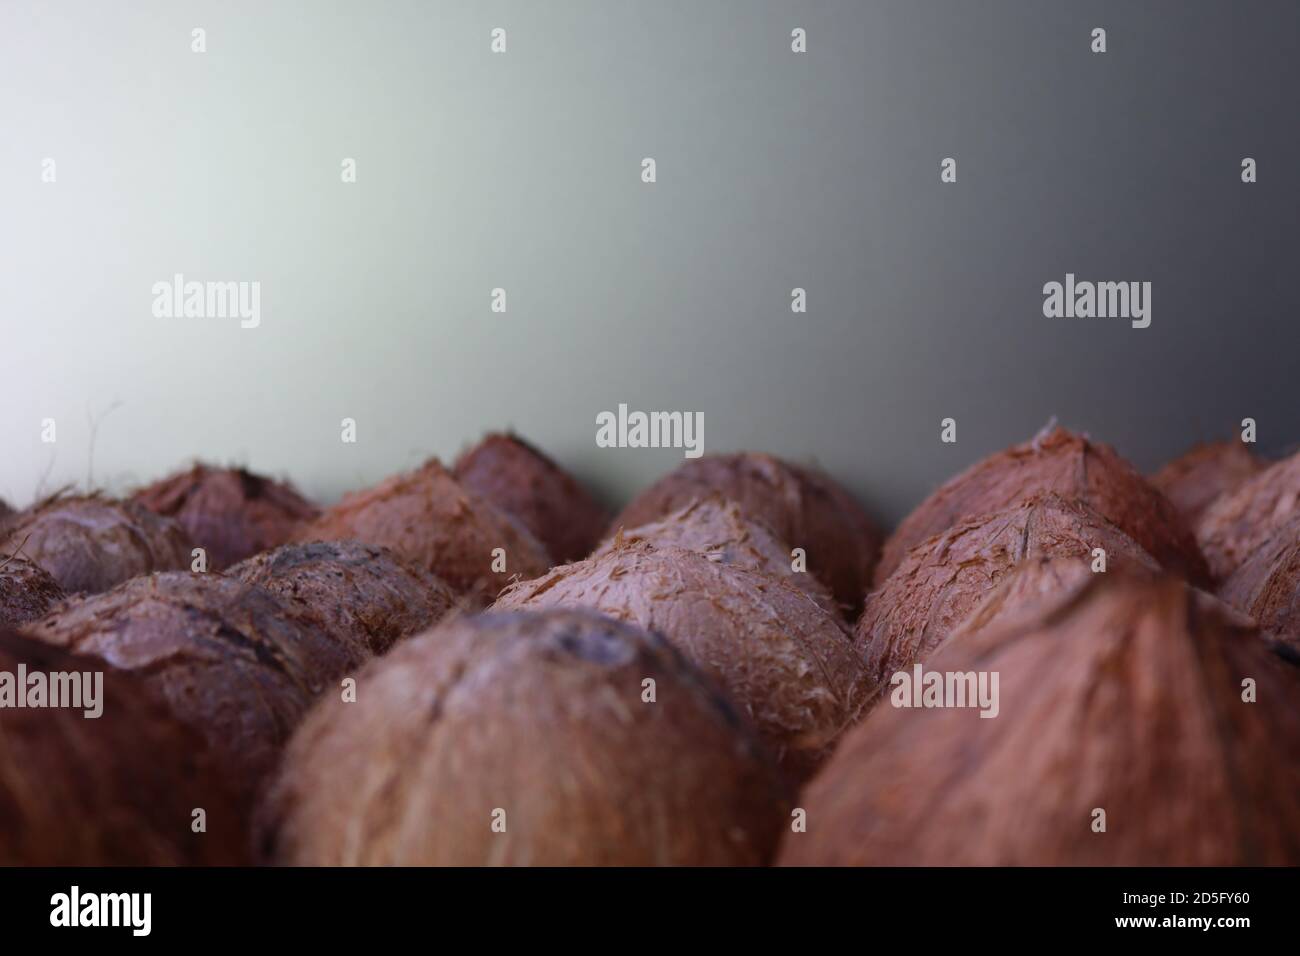 These are coconut shells. After collecting coconut spread we can see these shells. These shells are ready for most creative handmade items. Stock Photo